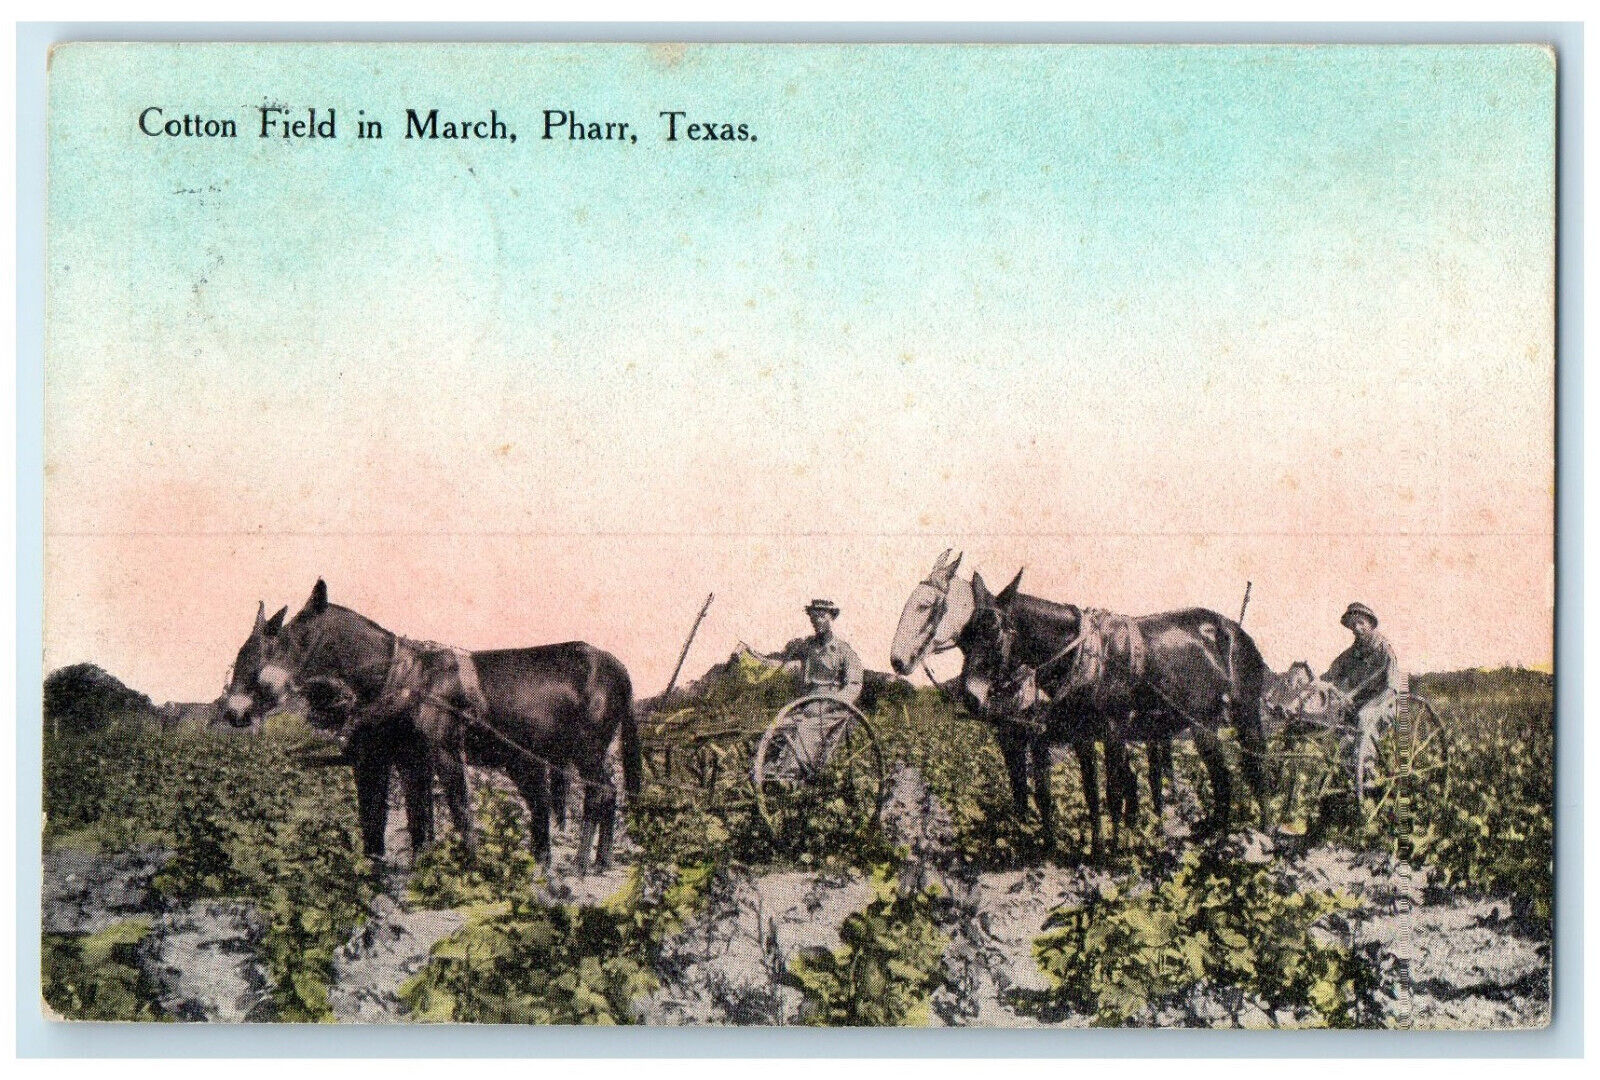 1913 Horse Carriage Cotton Field in March Pharr Texas TX Posted Antique Postcard